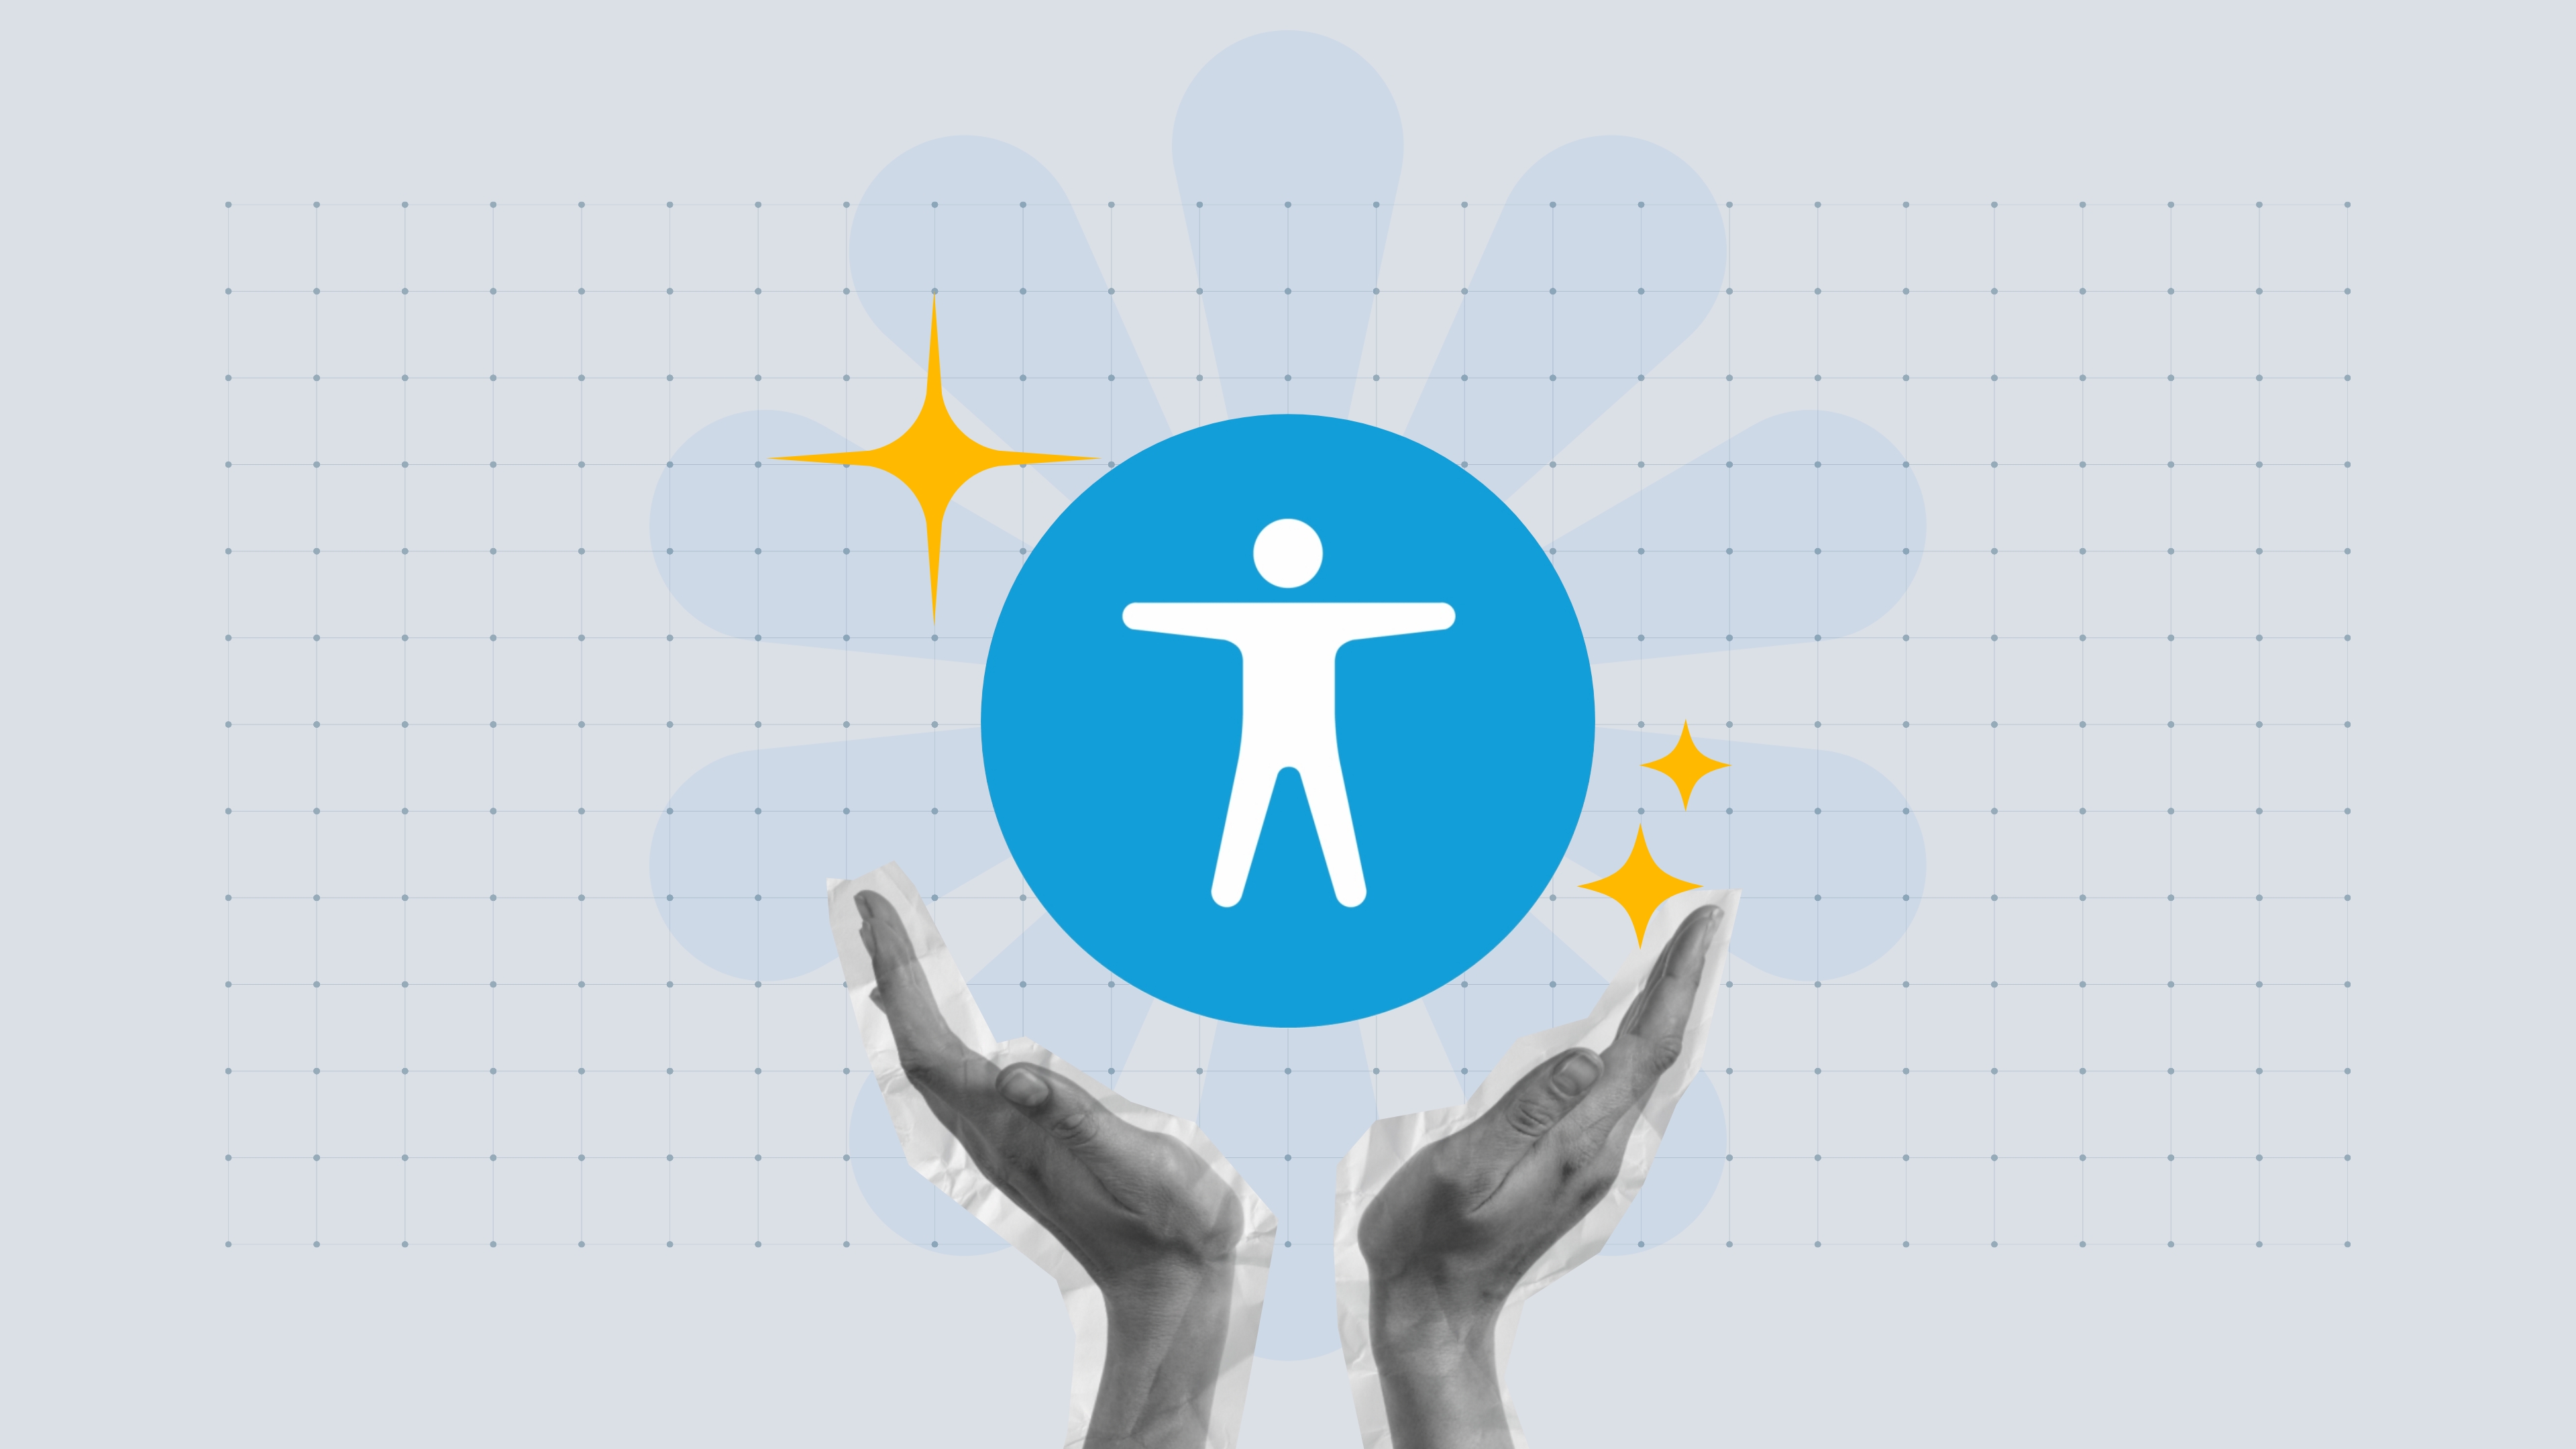 Stylized image of hands holding the Accessibility logo 